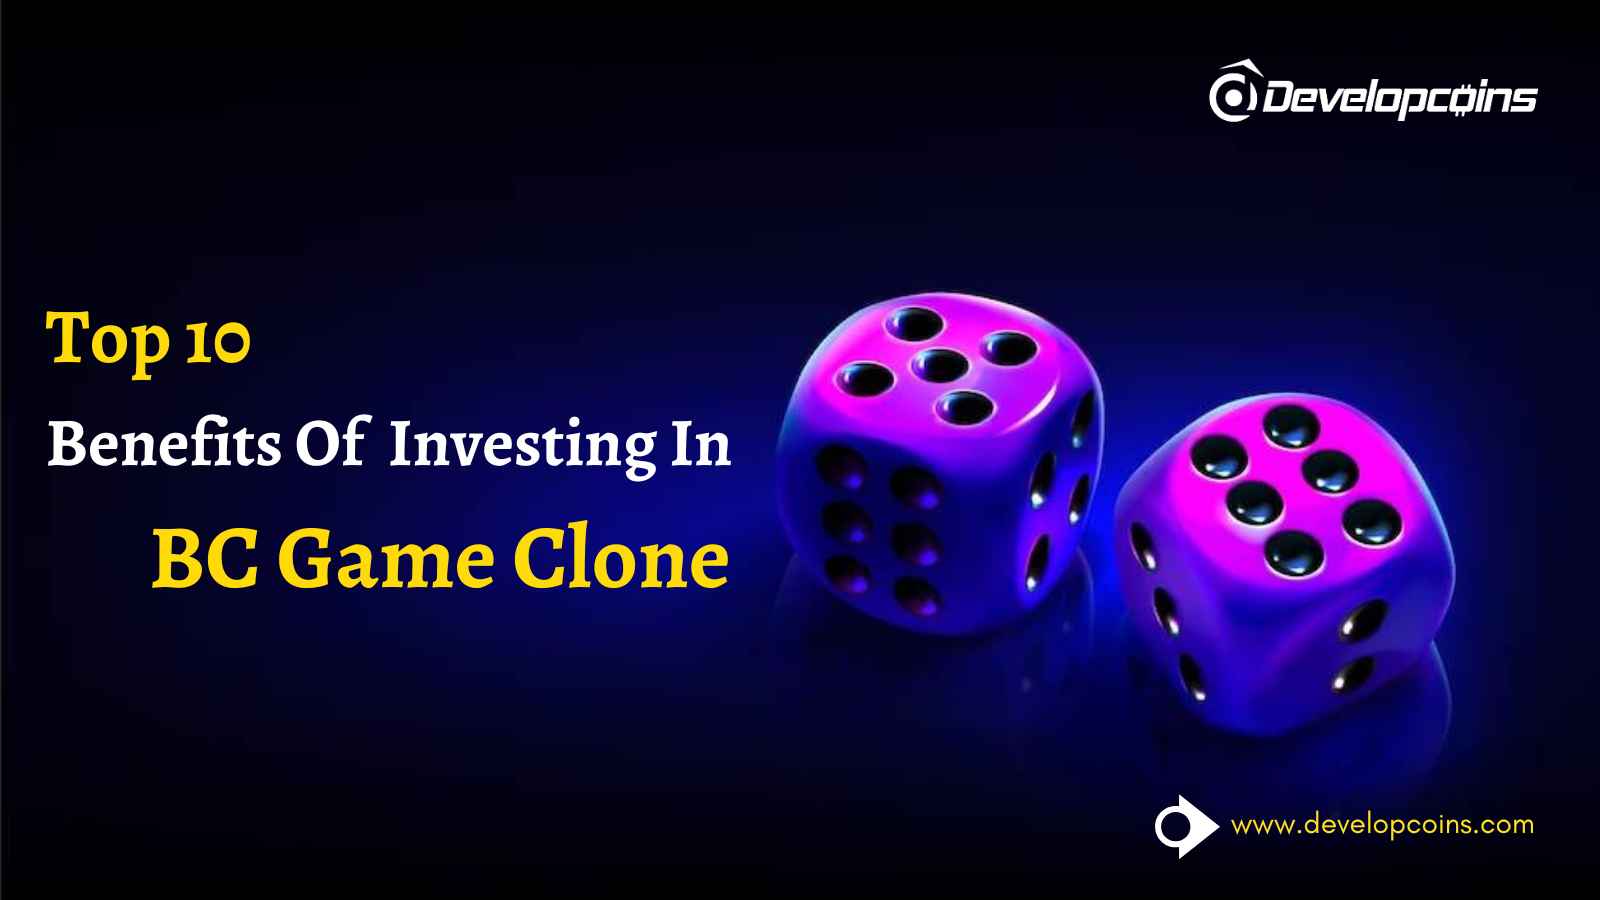 Top 10 Business Benefits Of Investing In BC Game Clone